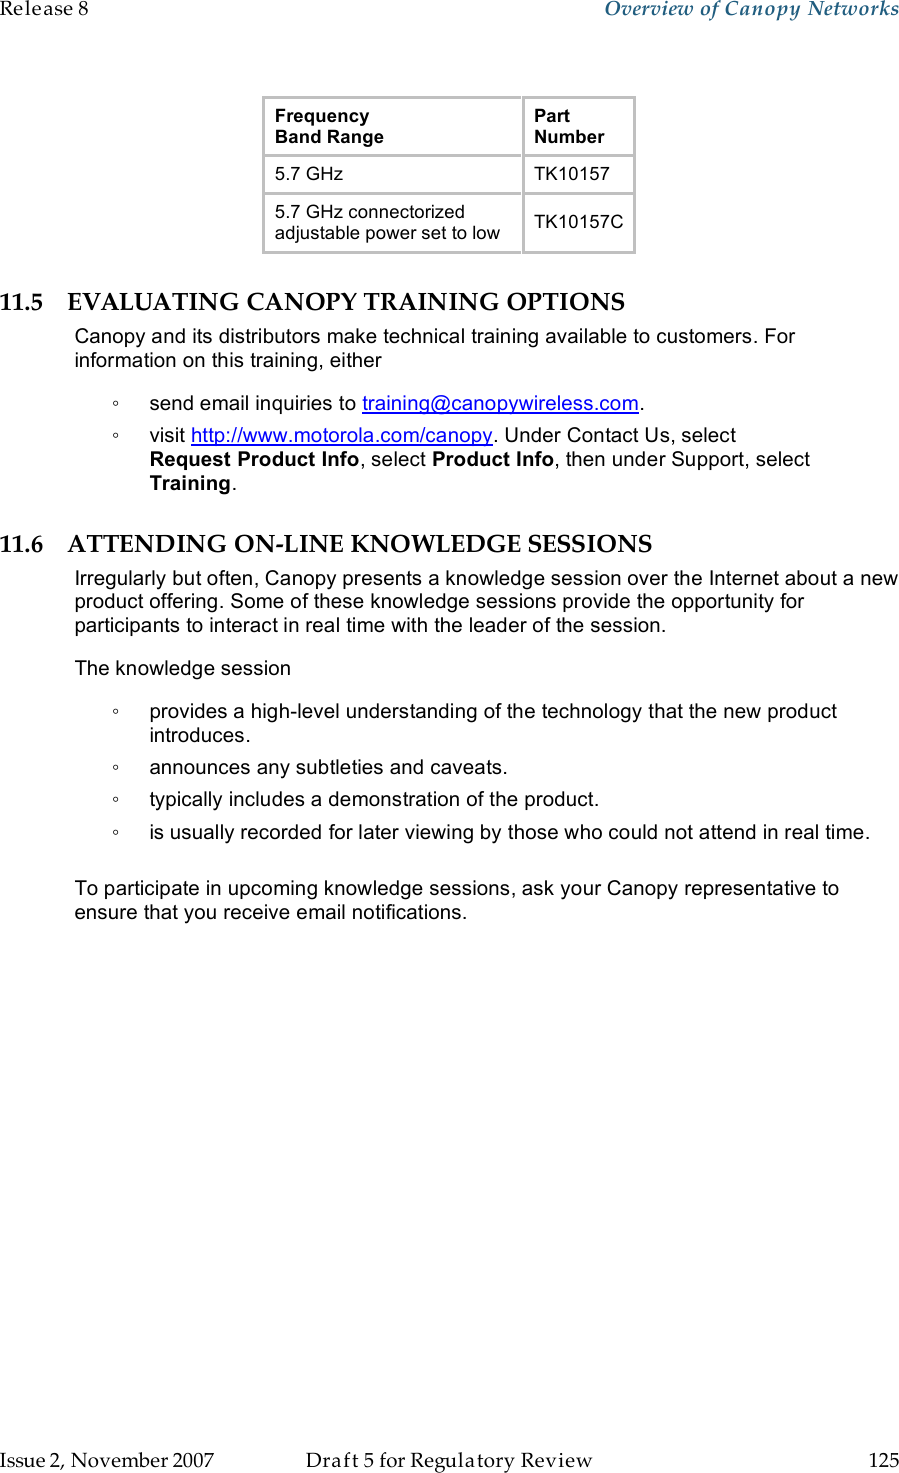 Release 8    Overview of Canopy Networks                  March 200                  Through Software Release 6.   Issue 2, November 2007  Draft 5 for Regulatory Review  125     Frequency  Band Range Part Number 5.7 GHz TK10157 5.7 GHz connectorized adjustable power set to low TK10157C 11.5 EVALUATING CANOPY TRAINING OPTIONS Canopy and its distributors make technical training available to customers. For information on this training, either ◦  send email inquiries to training@canopywireless.com. ◦  visit http://www.motorola.com/canopy. Under Contact Us, select Request Product Info, select Product Info, then under Support, select Training. 11.6 ATTENDING ON-LINE KNOWLEDGE SESSIONS Irregularly but often, Canopy presents a knowledge session over the Internet about a new product offering. Some of these knowledge sessions provide the opportunity for participants to interact in real time with the leader of the session.  The knowledge session  ◦  provides a high-level understanding of the technology that the new product introduces.  ◦  announces any subtleties and caveats. ◦  typically includes a demonstration of the product. ◦  is usually recorded for later viewing by those who could not attend in real time.  To participate in upcoming knowledge sessions, ask your Canopy representative to ensure that you receive email notifications. 